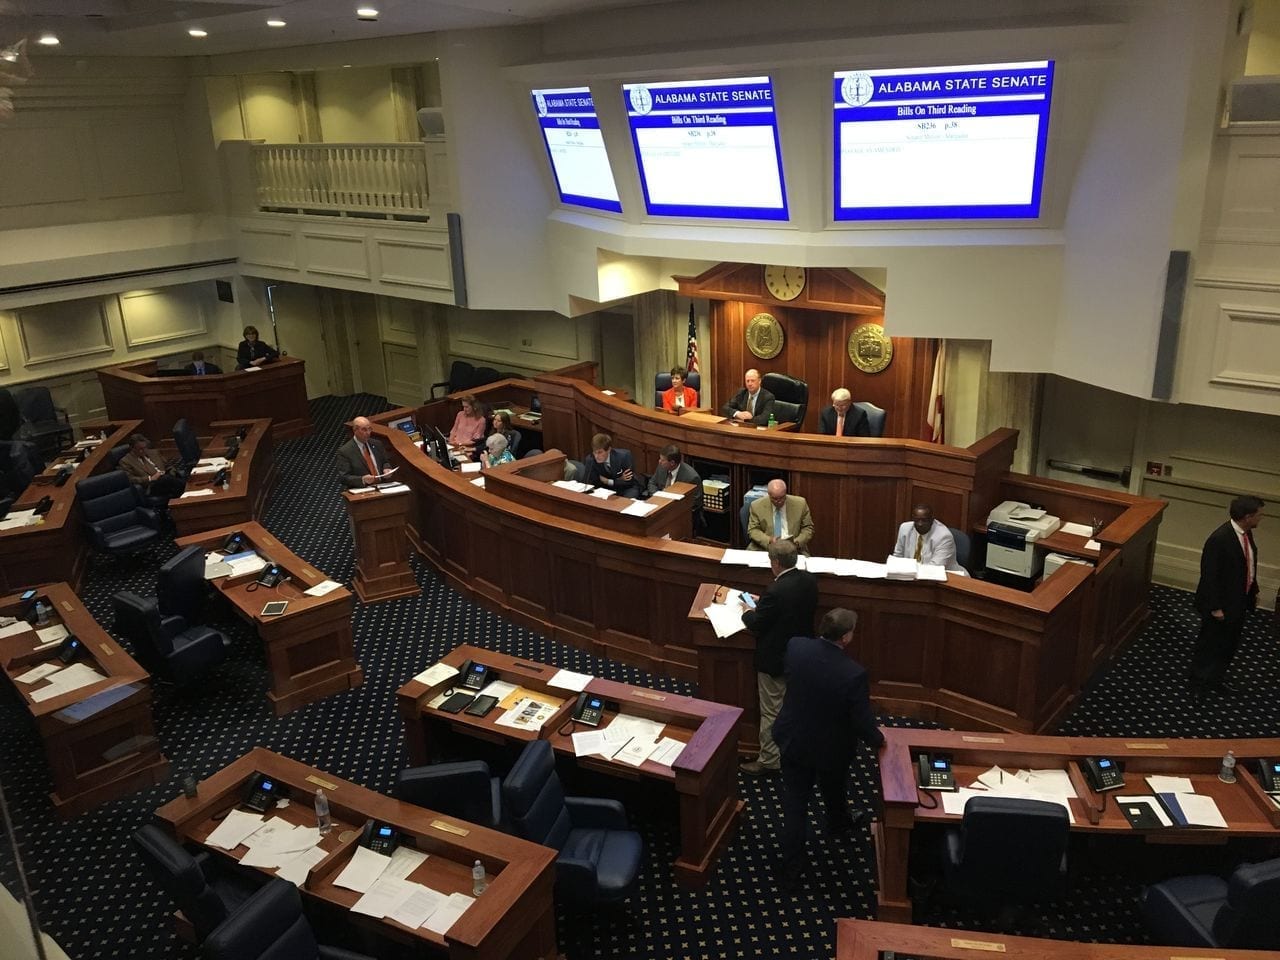 Sen. Larry Stutts, R-Sheffield, at the lectern on the left, argues against a bill that would legalize medical marijuana in Alabama. At the right lectern is Sen. Tim Melson, R-Florence, sponsor of the bill. (Mike Cason/mcason@al.com)